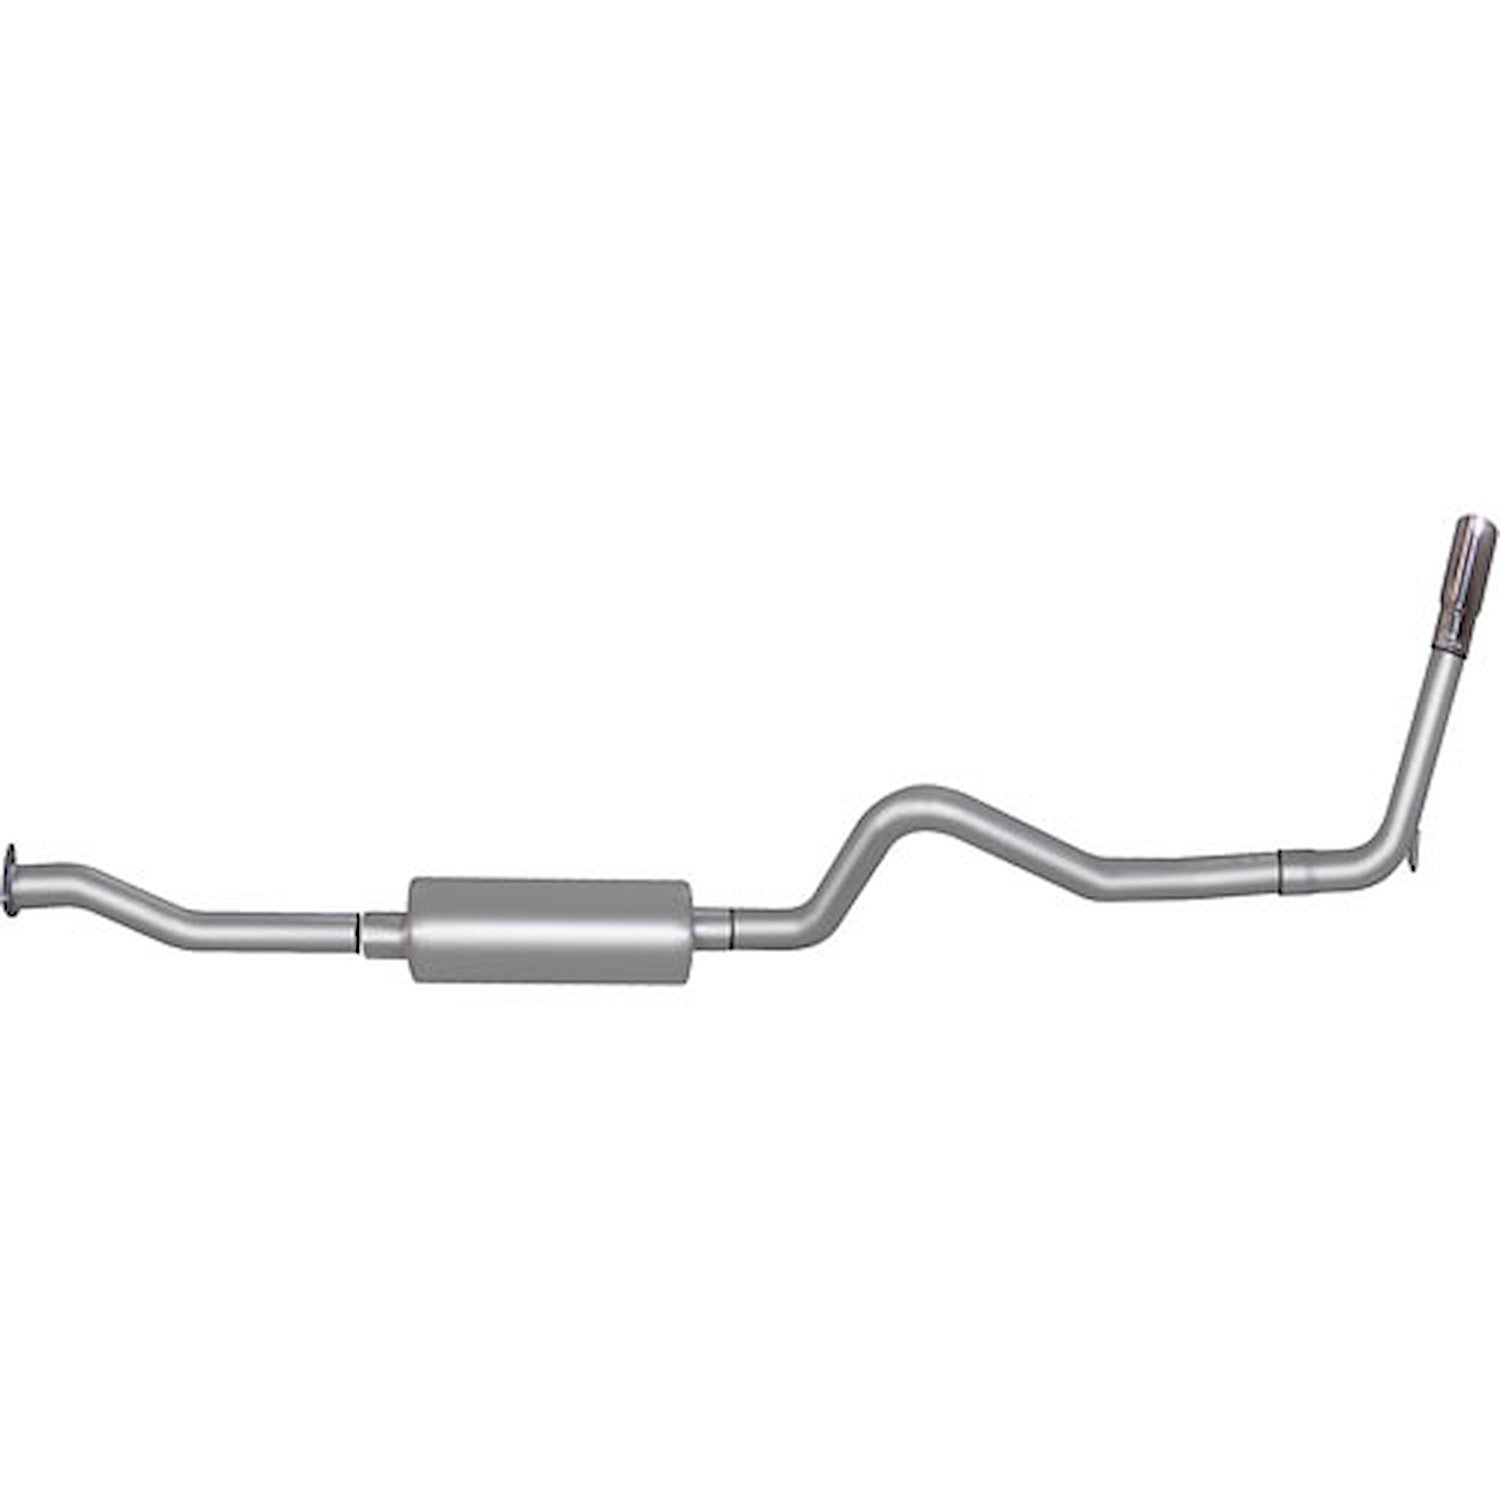 Swept-Side Aluminized Steel Cat-Back Exhaust 1998-03 Chevy